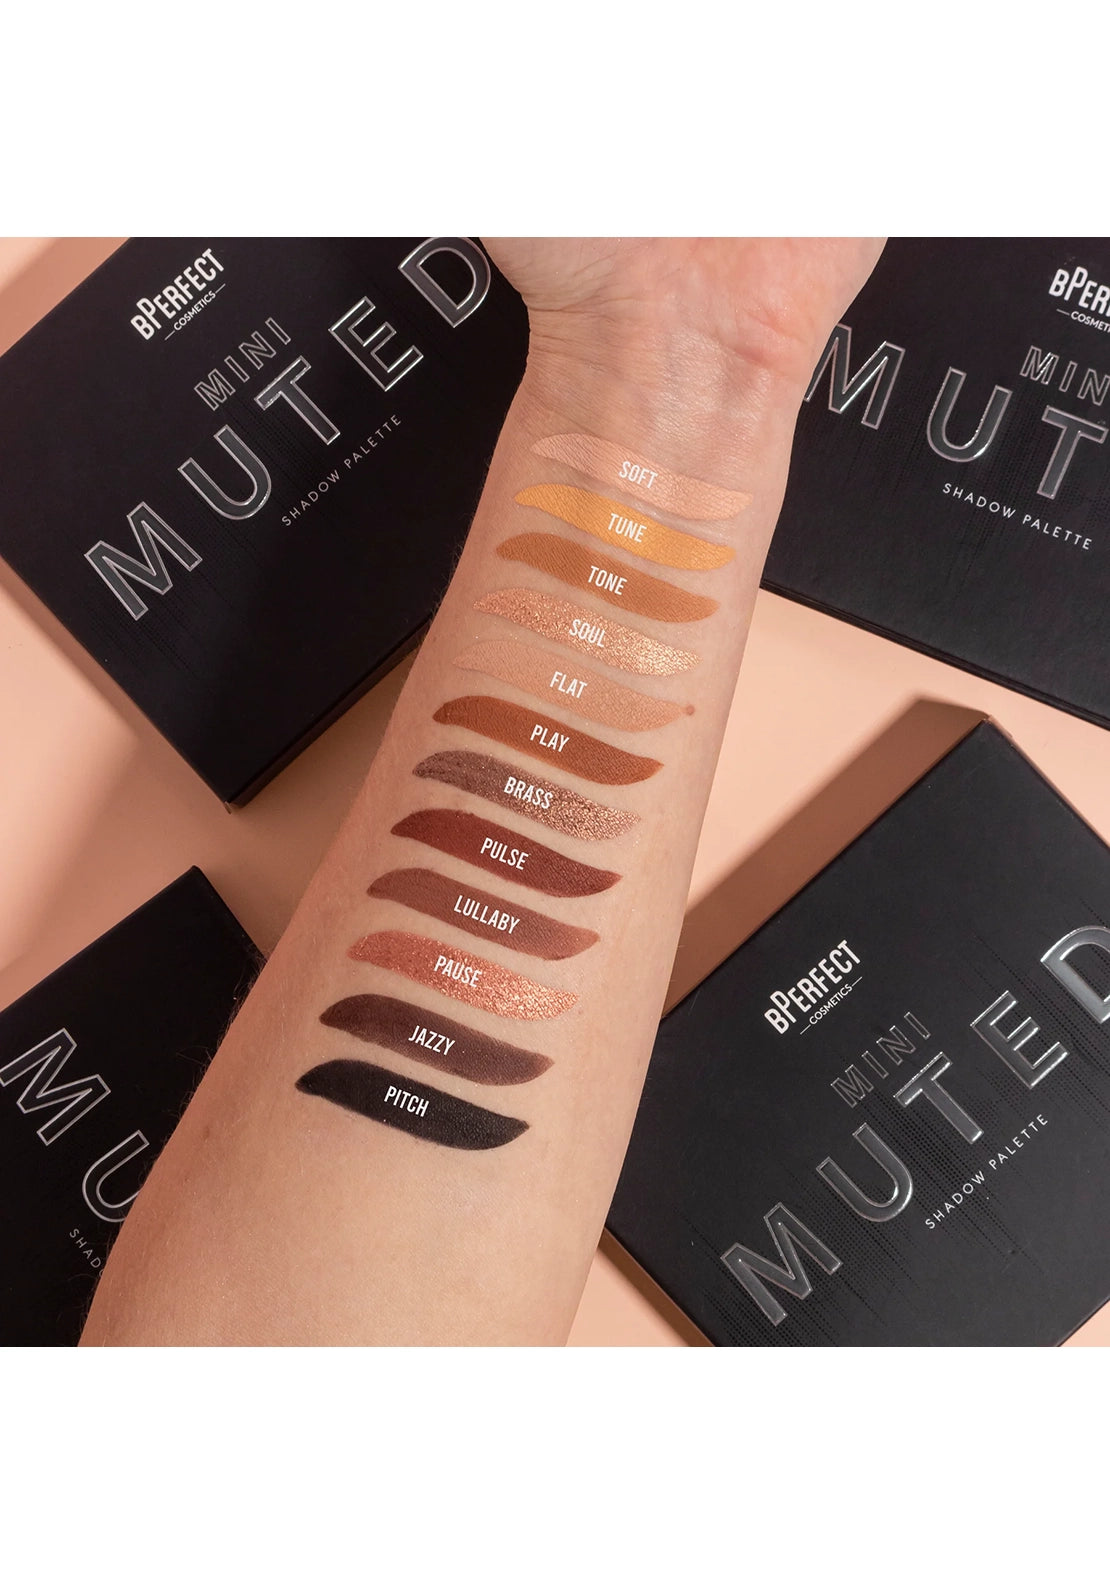 Bperfect Mini Muted Palette 4 Shaws Department Stores